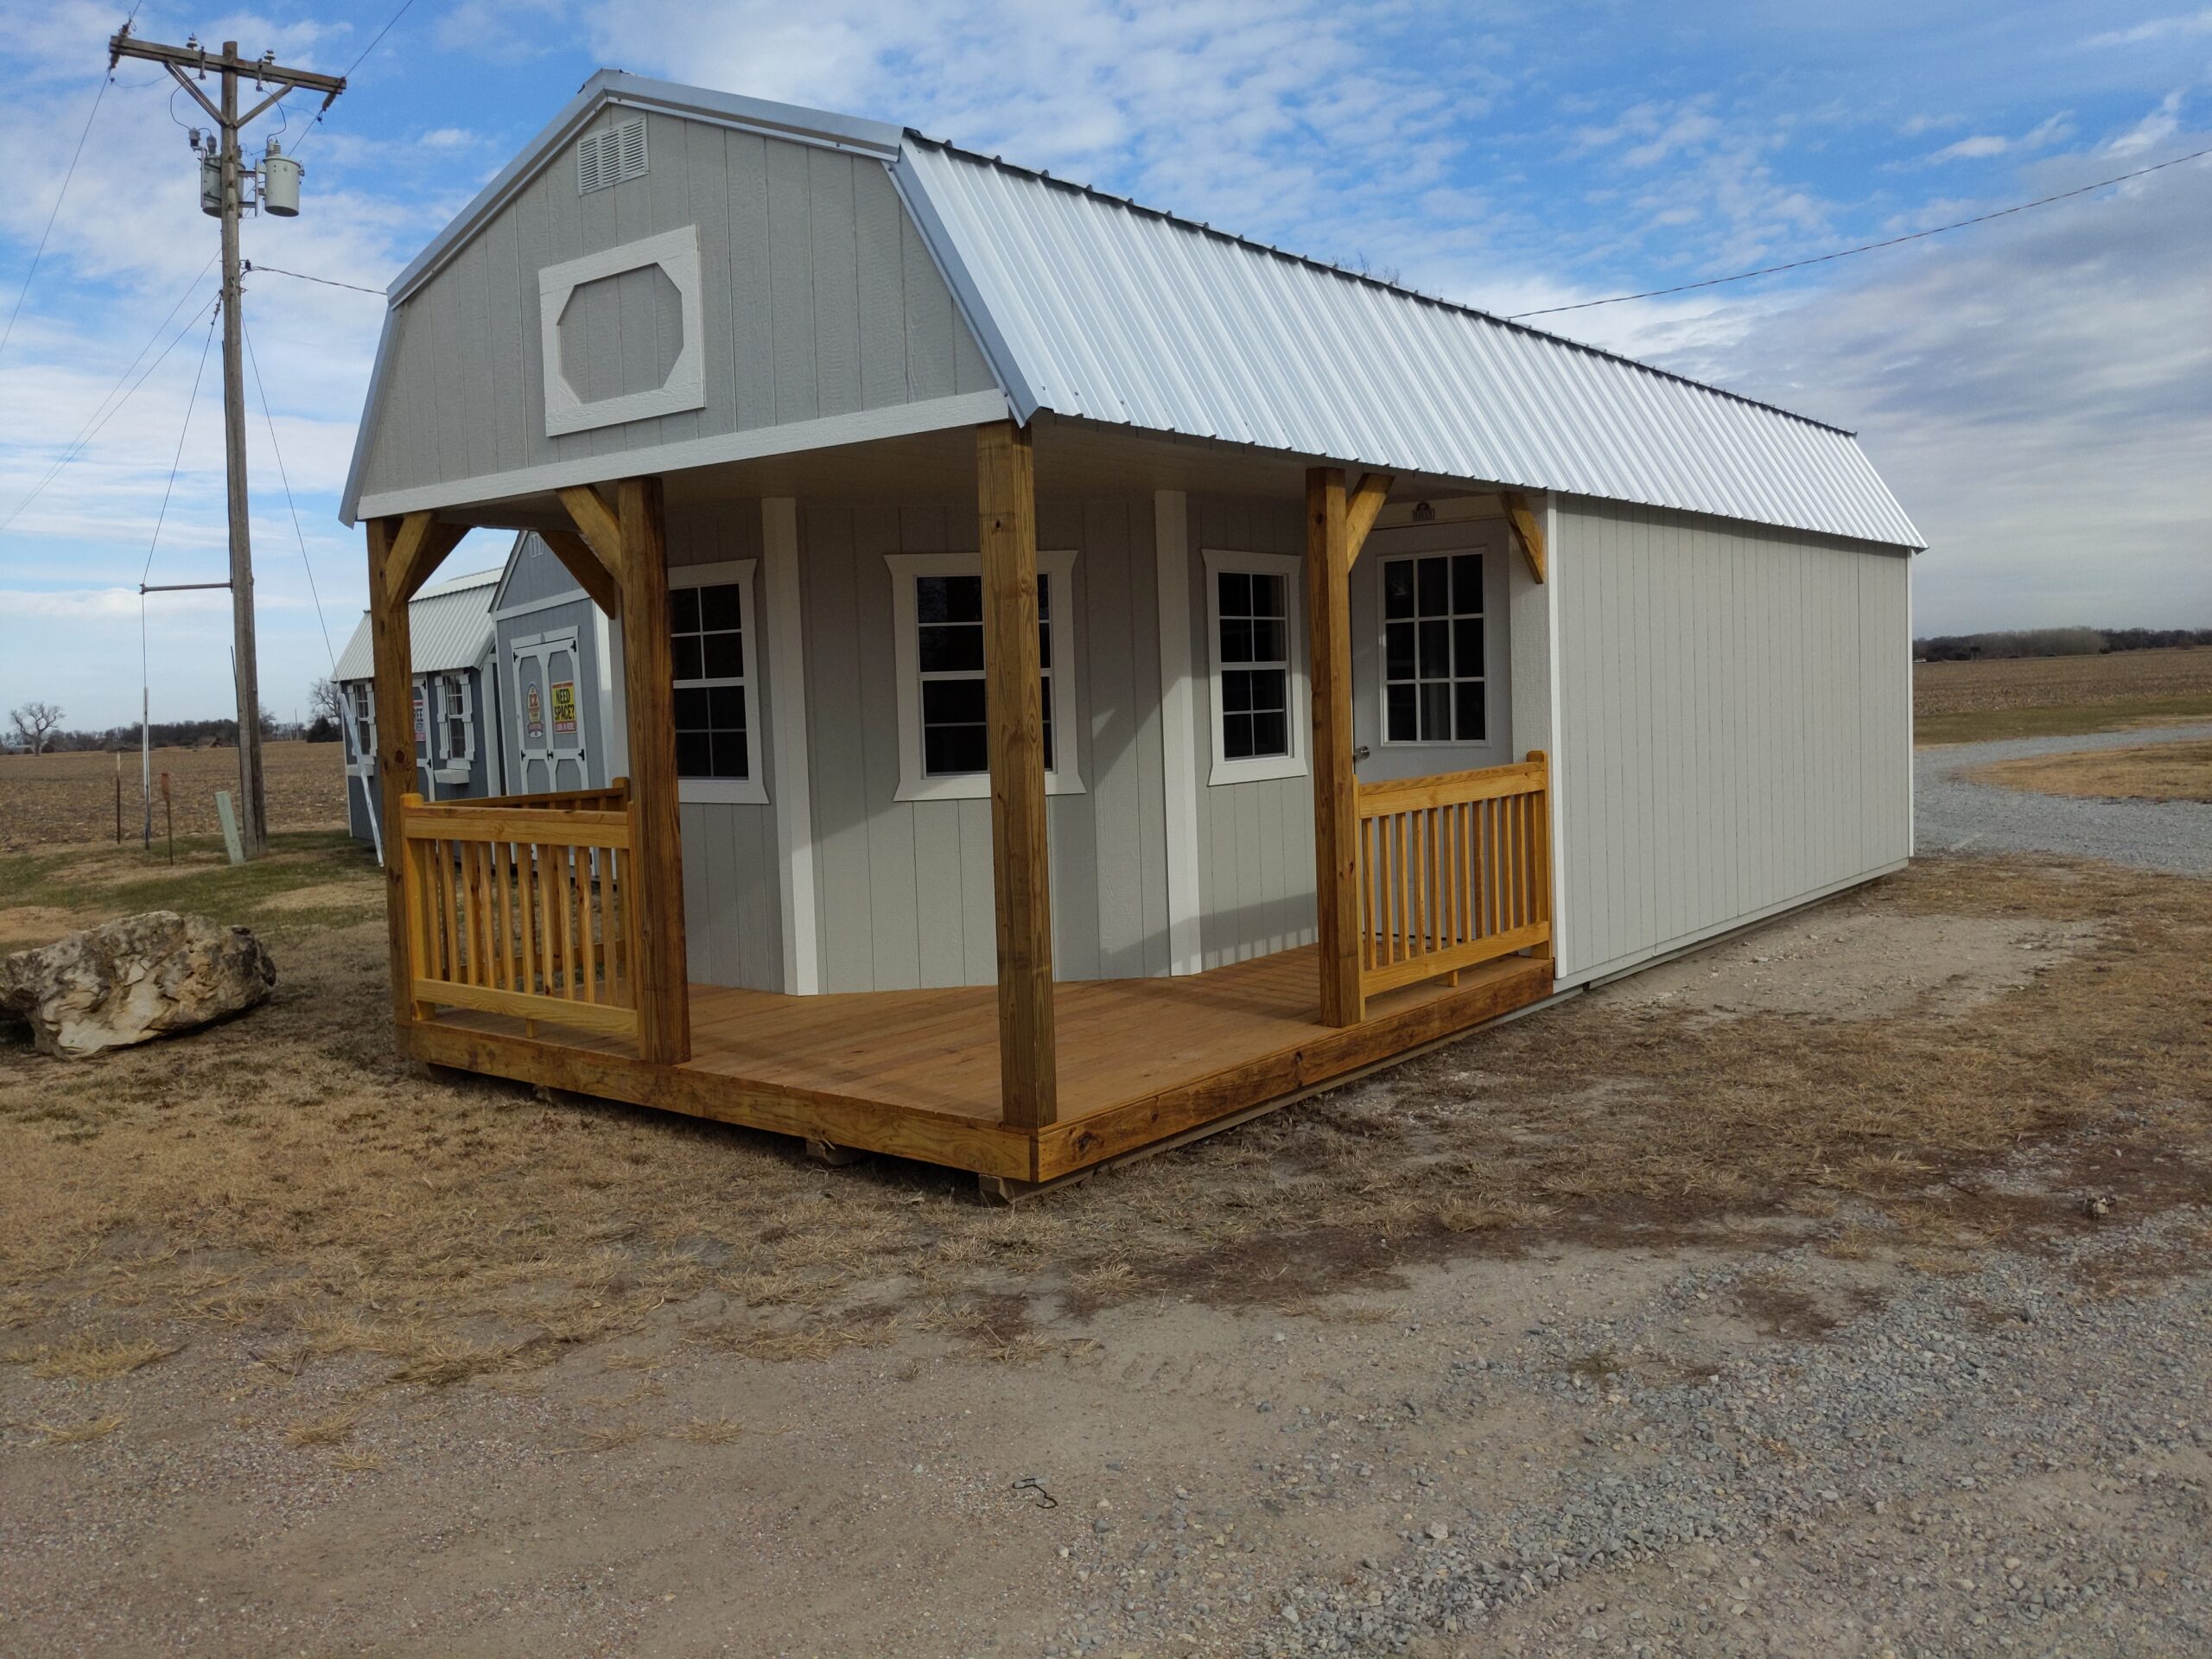 Cottages With Porches FOR SALE- Projective Portable Buildings, Sheds & Tiny Homes